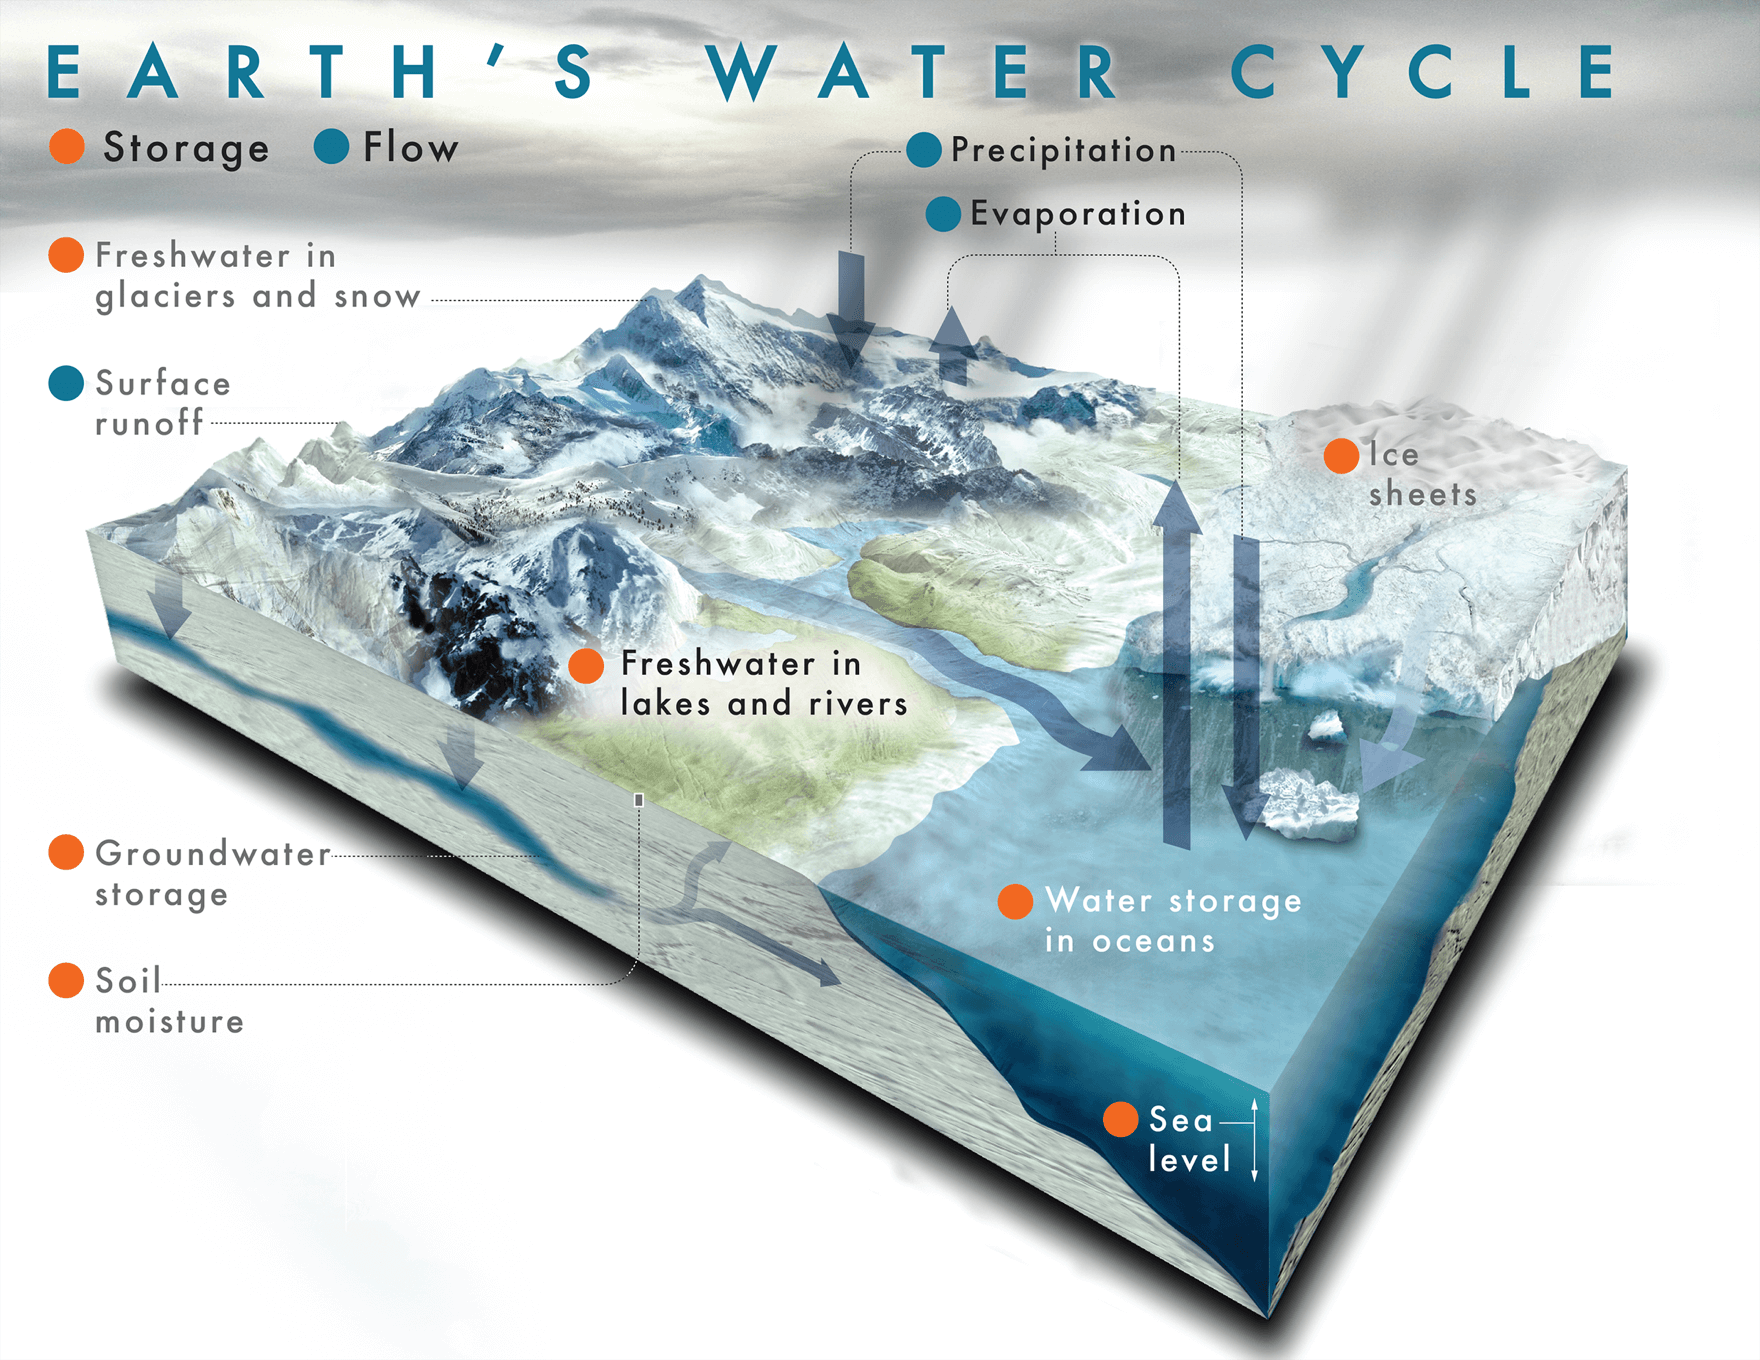 An illustration of the water cycle showing how water travels from rivers and streams to clouds to snow and back again